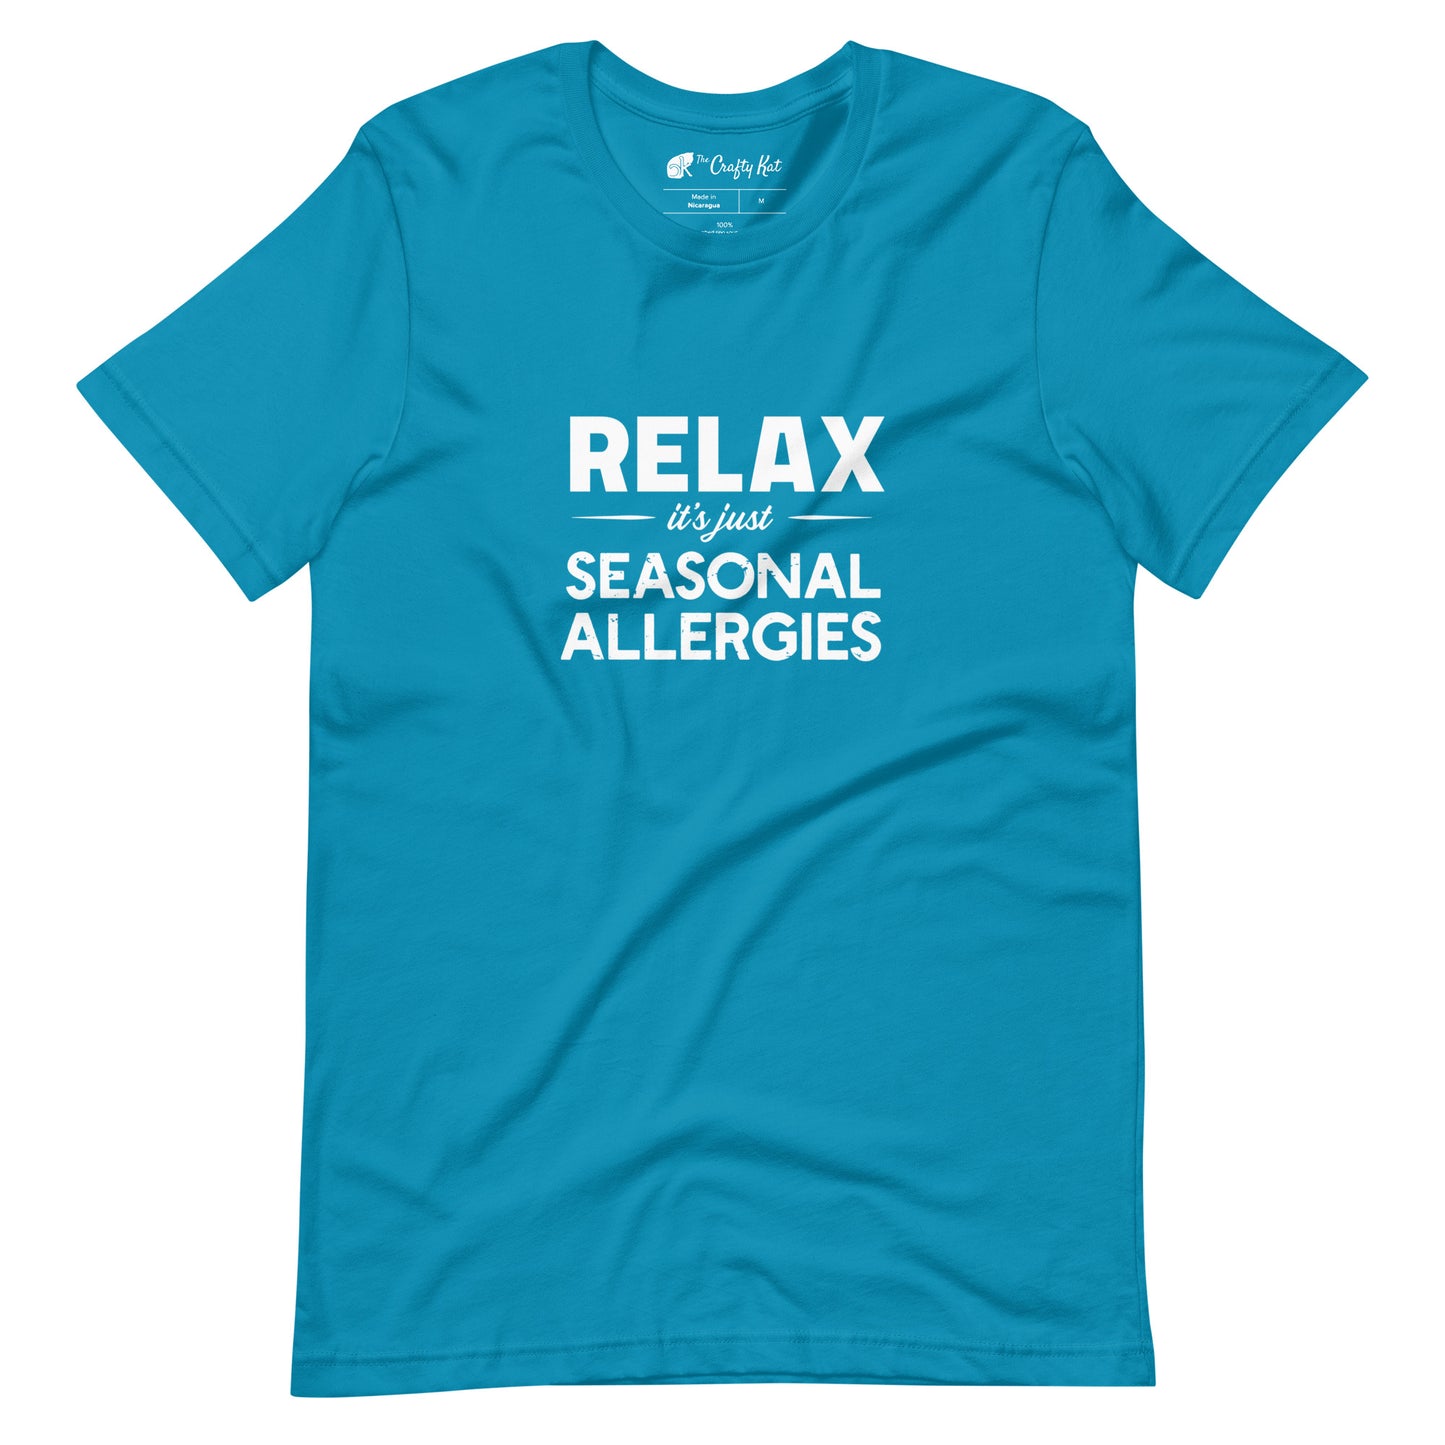 Aqua (cyan) t-shirt with white graphic: "RELAX it's just SEASONAL ALLERGIES"